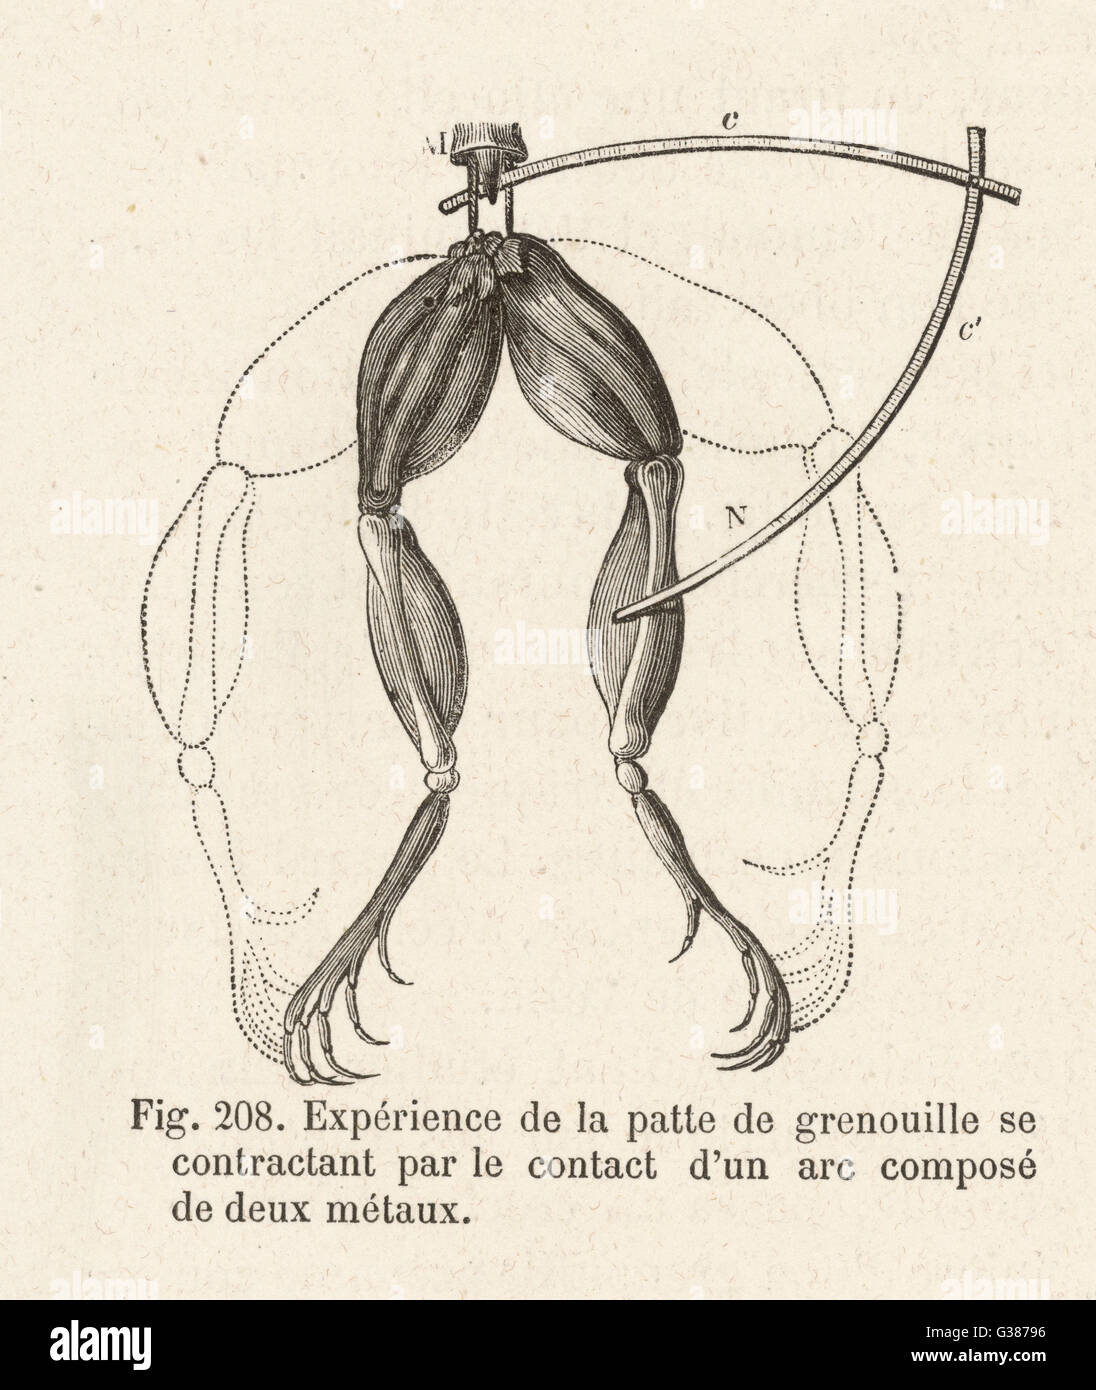 Experiment devised by Luigi  Galvani, showing movement of  Frog legs due to electrical  current.       Date: early 1780s Stock Photo